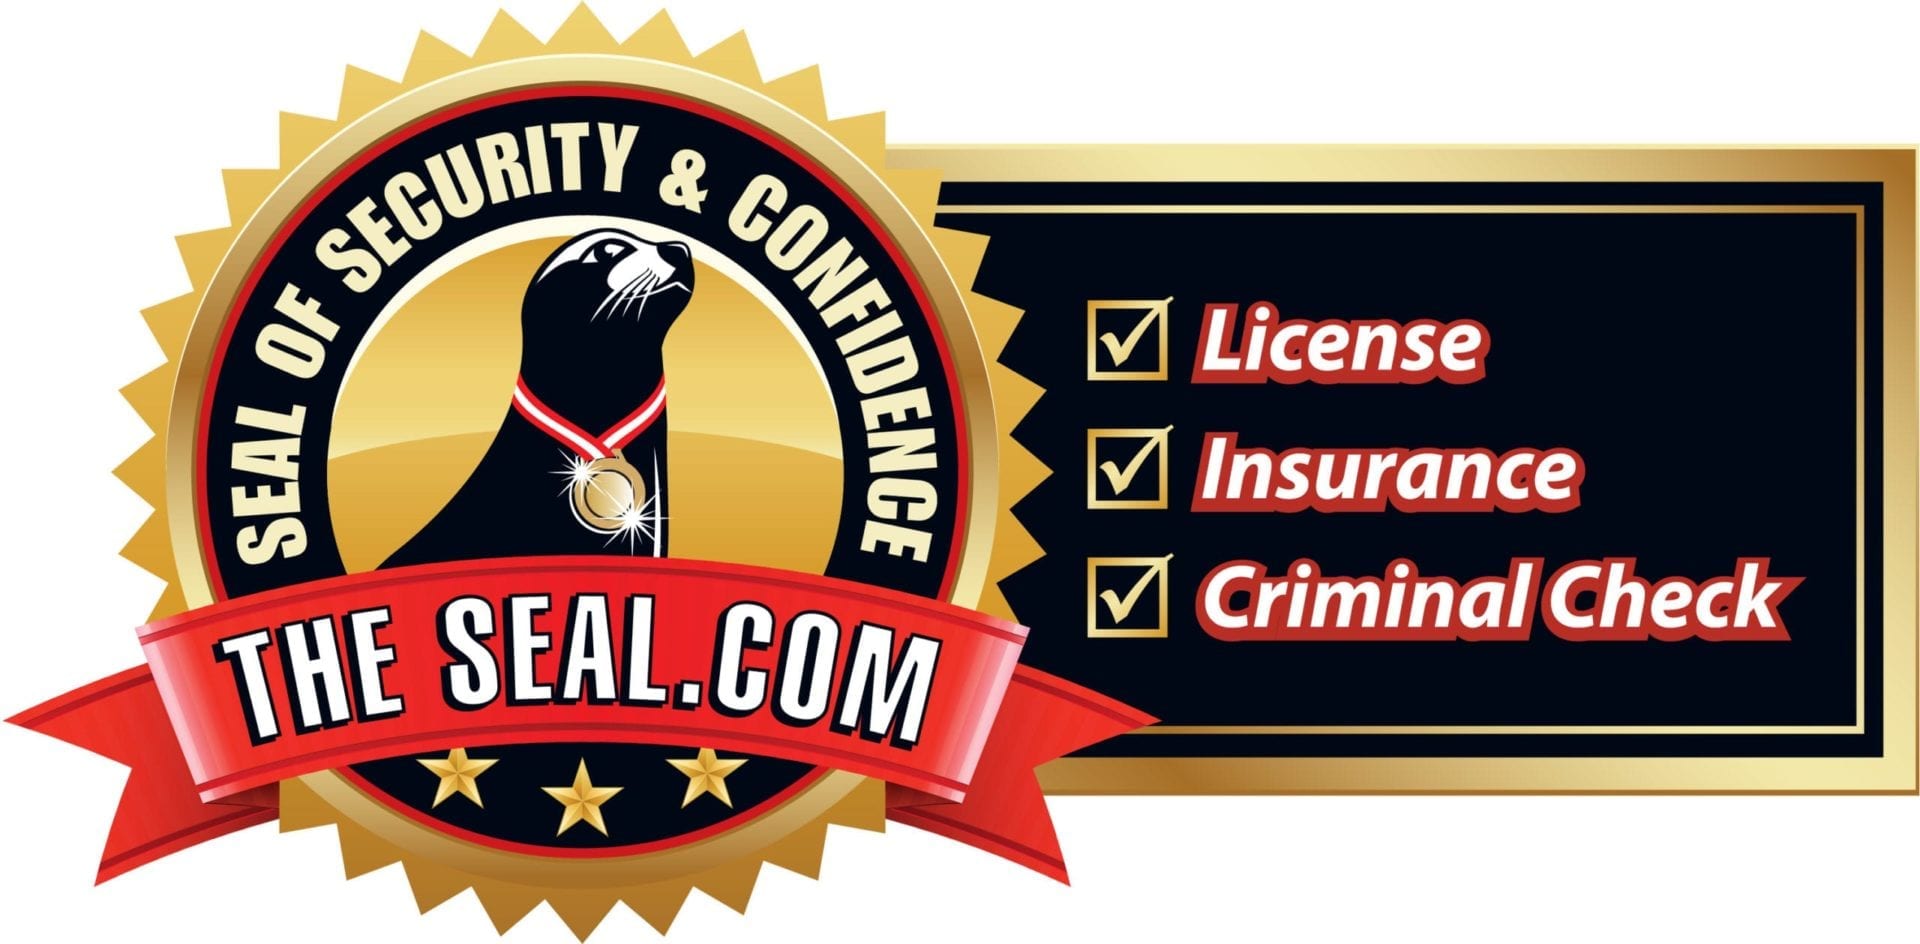 Licensed, Insured, Background Check. Emergency Plumbing Service In Fallbrook, CA.